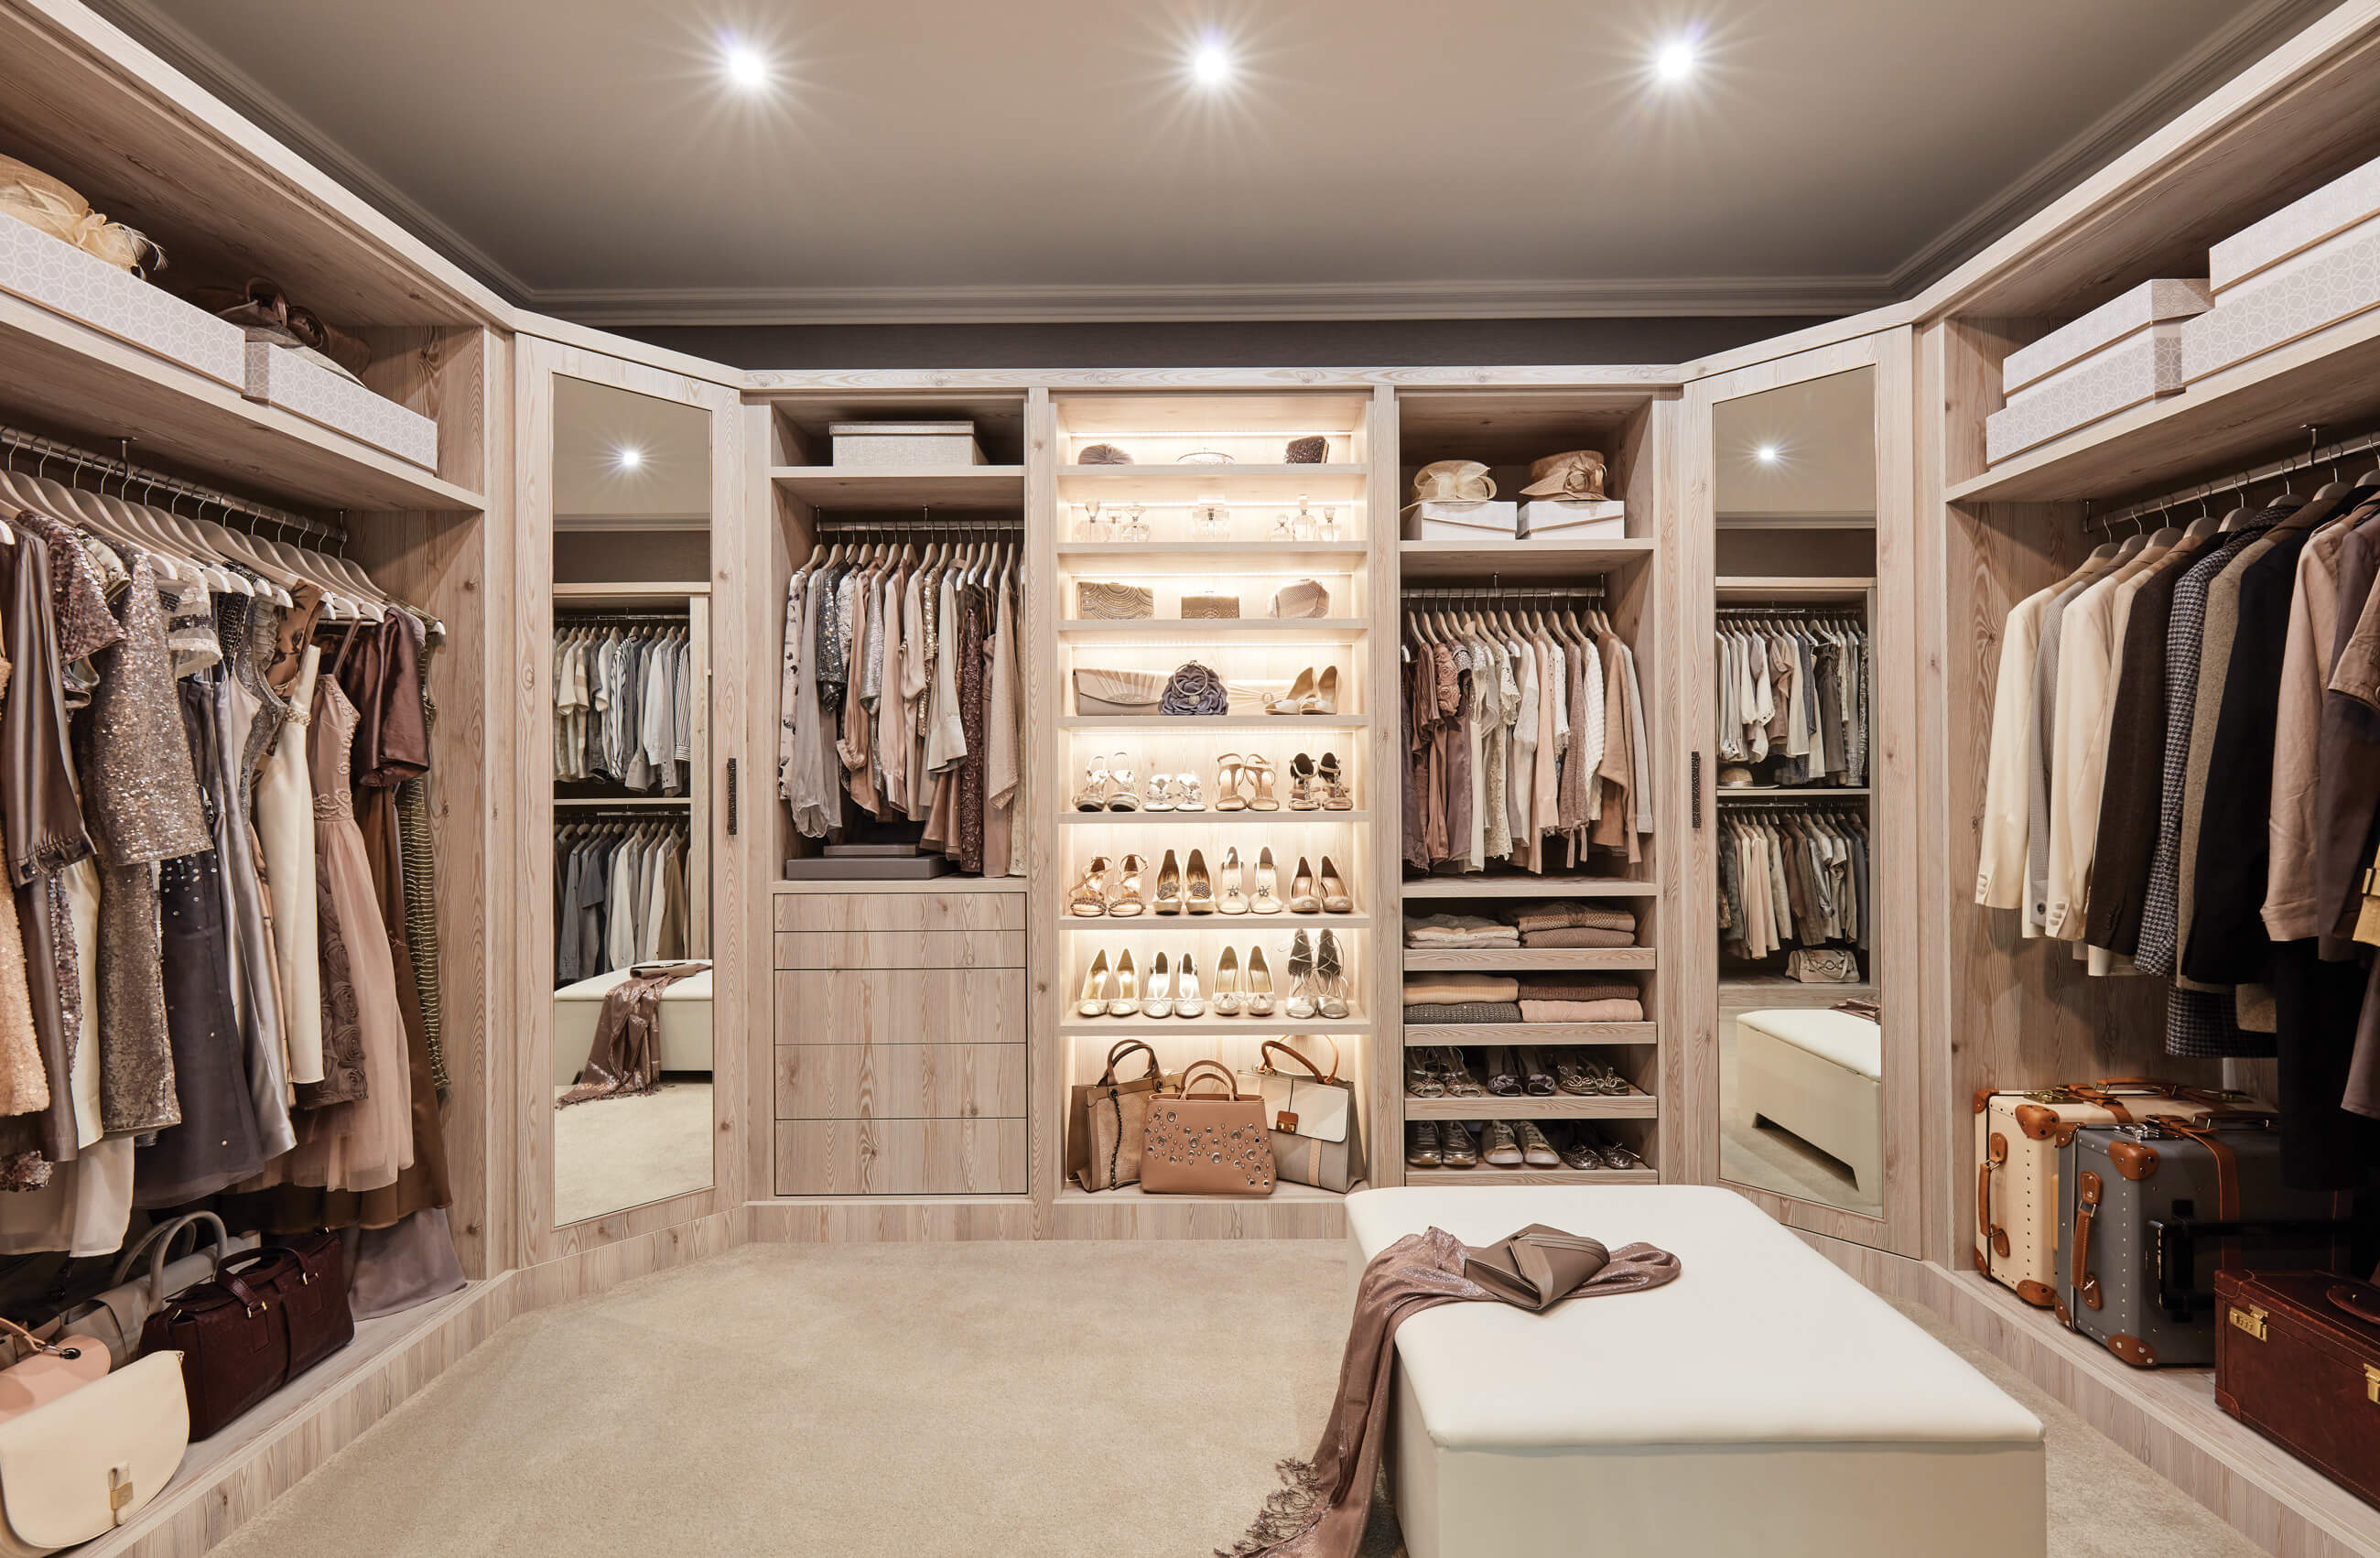 Boutique Dressing Room Ideas, Fitting Room Ideas